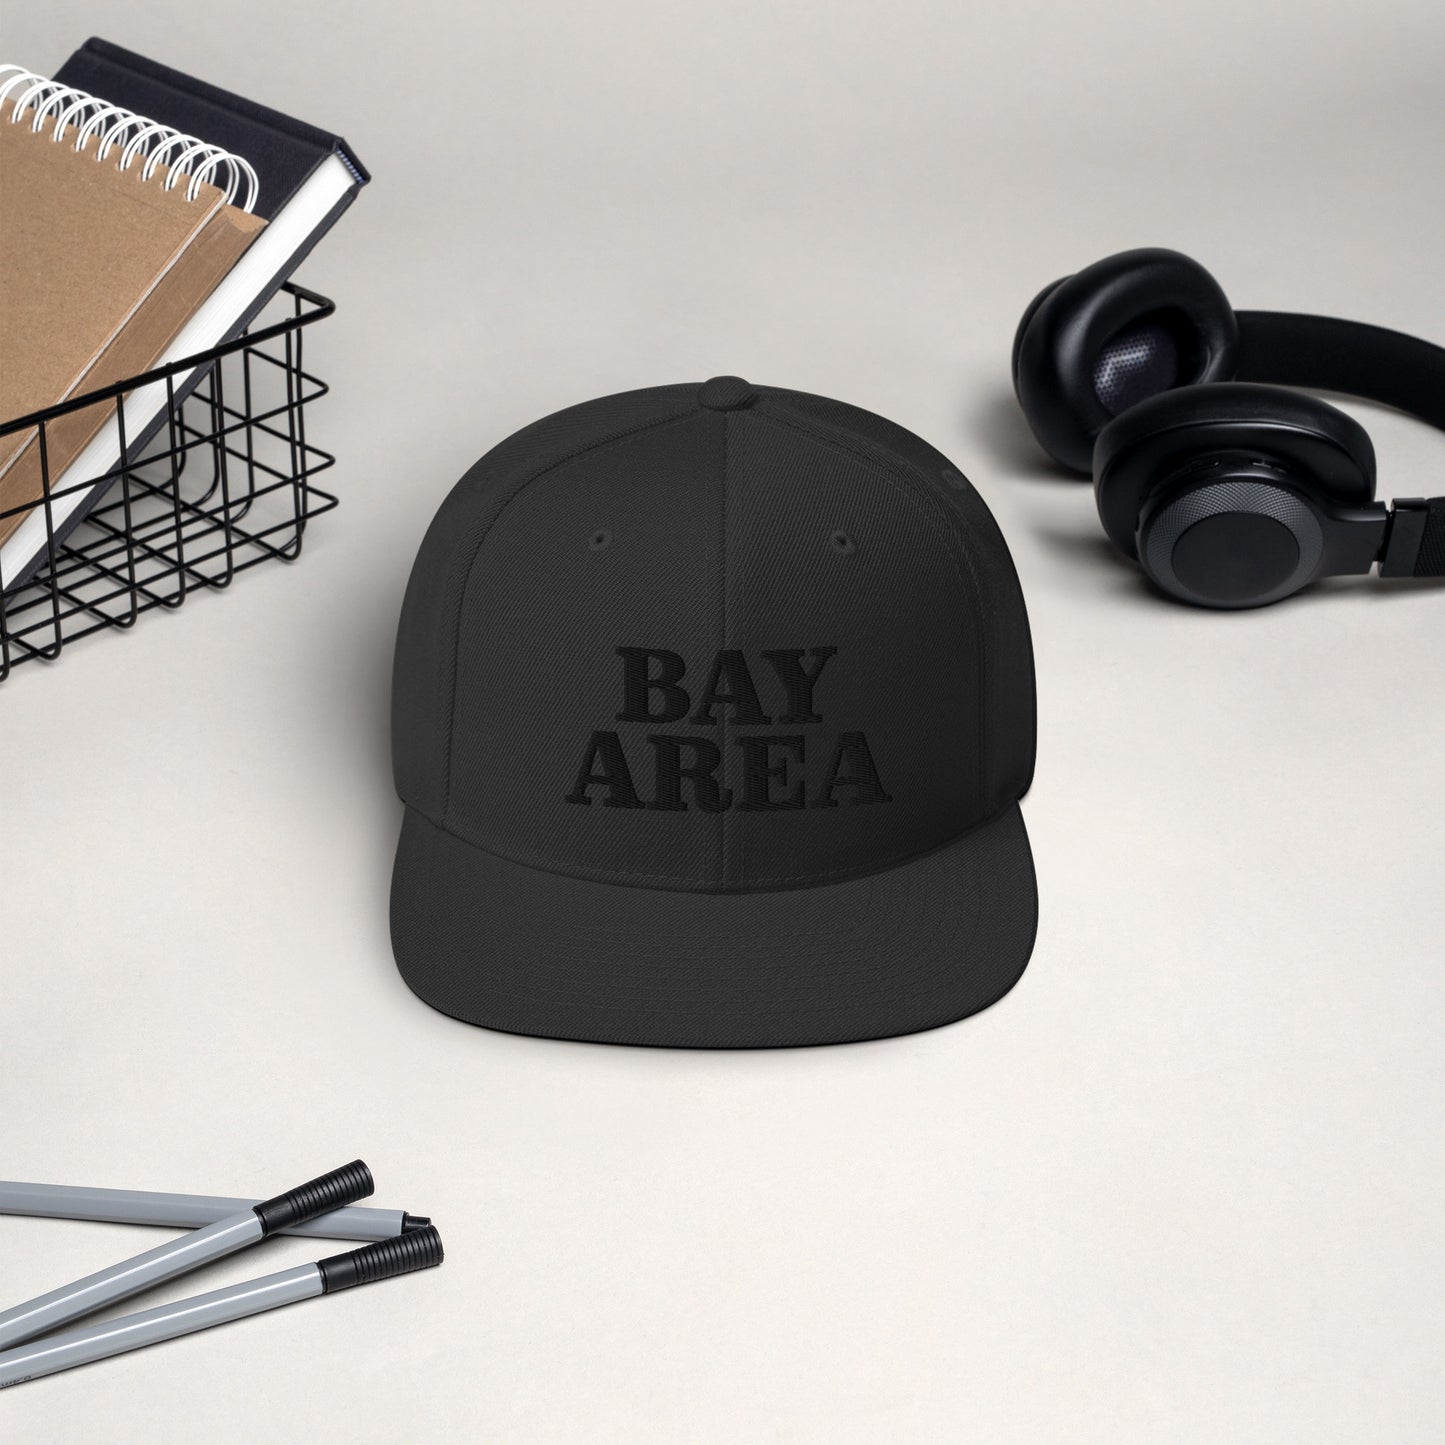 Bay Area | Classic Snapback Hat | Embroidered